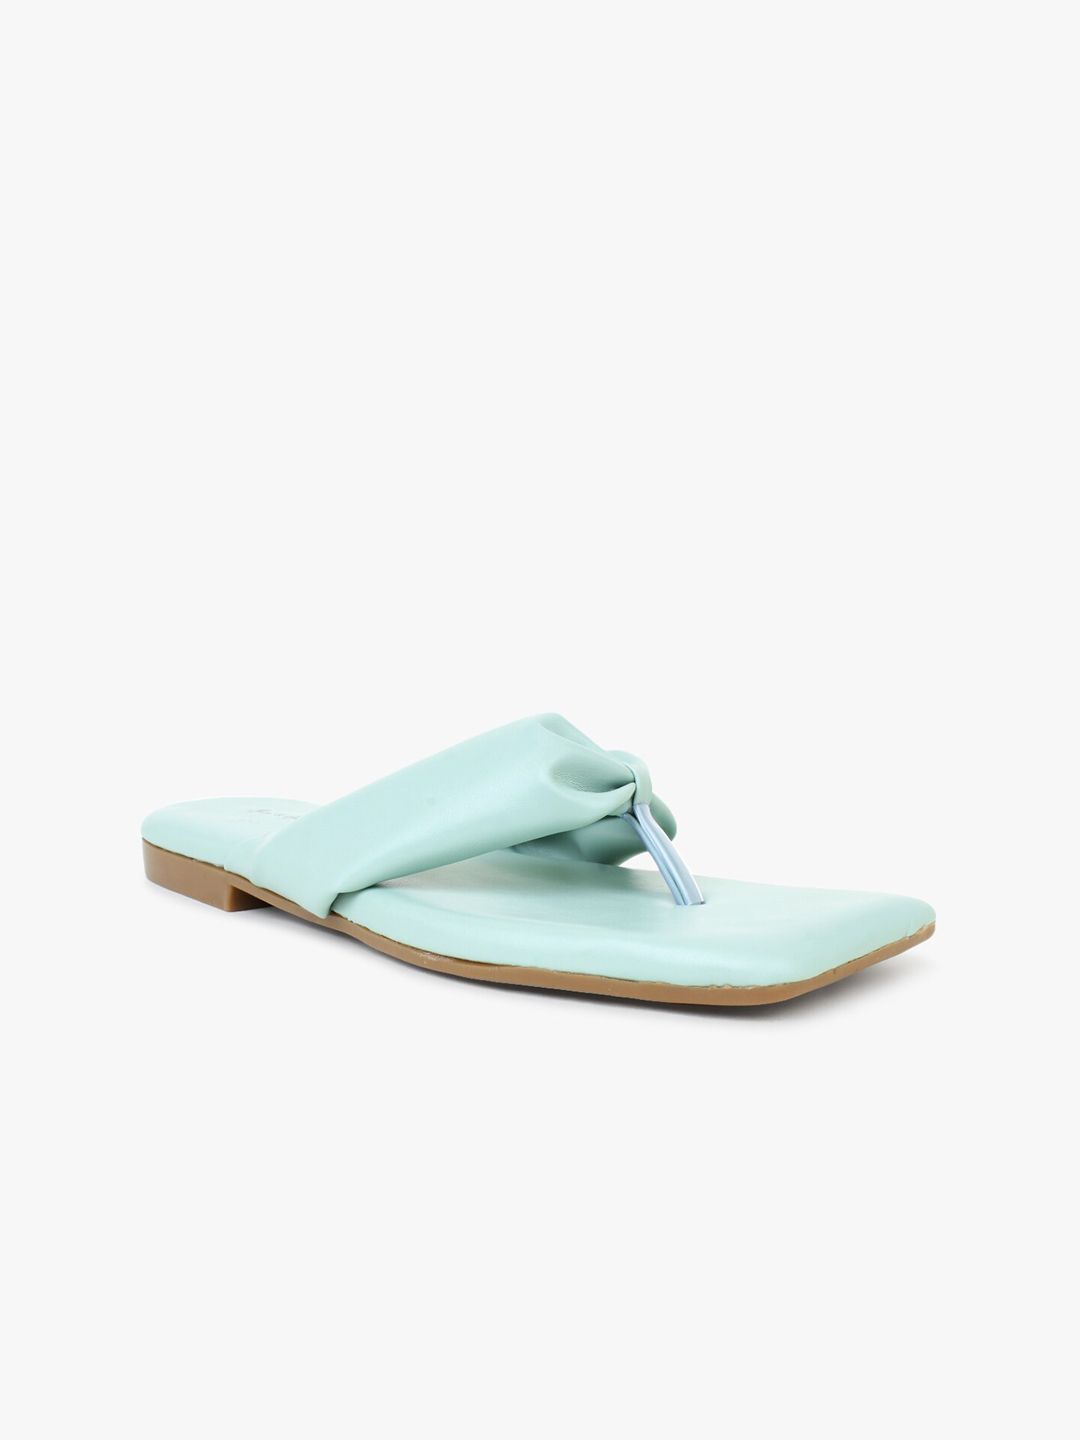 Mast & Harbour Women Sea Green Mules with Bows Flats Price in India